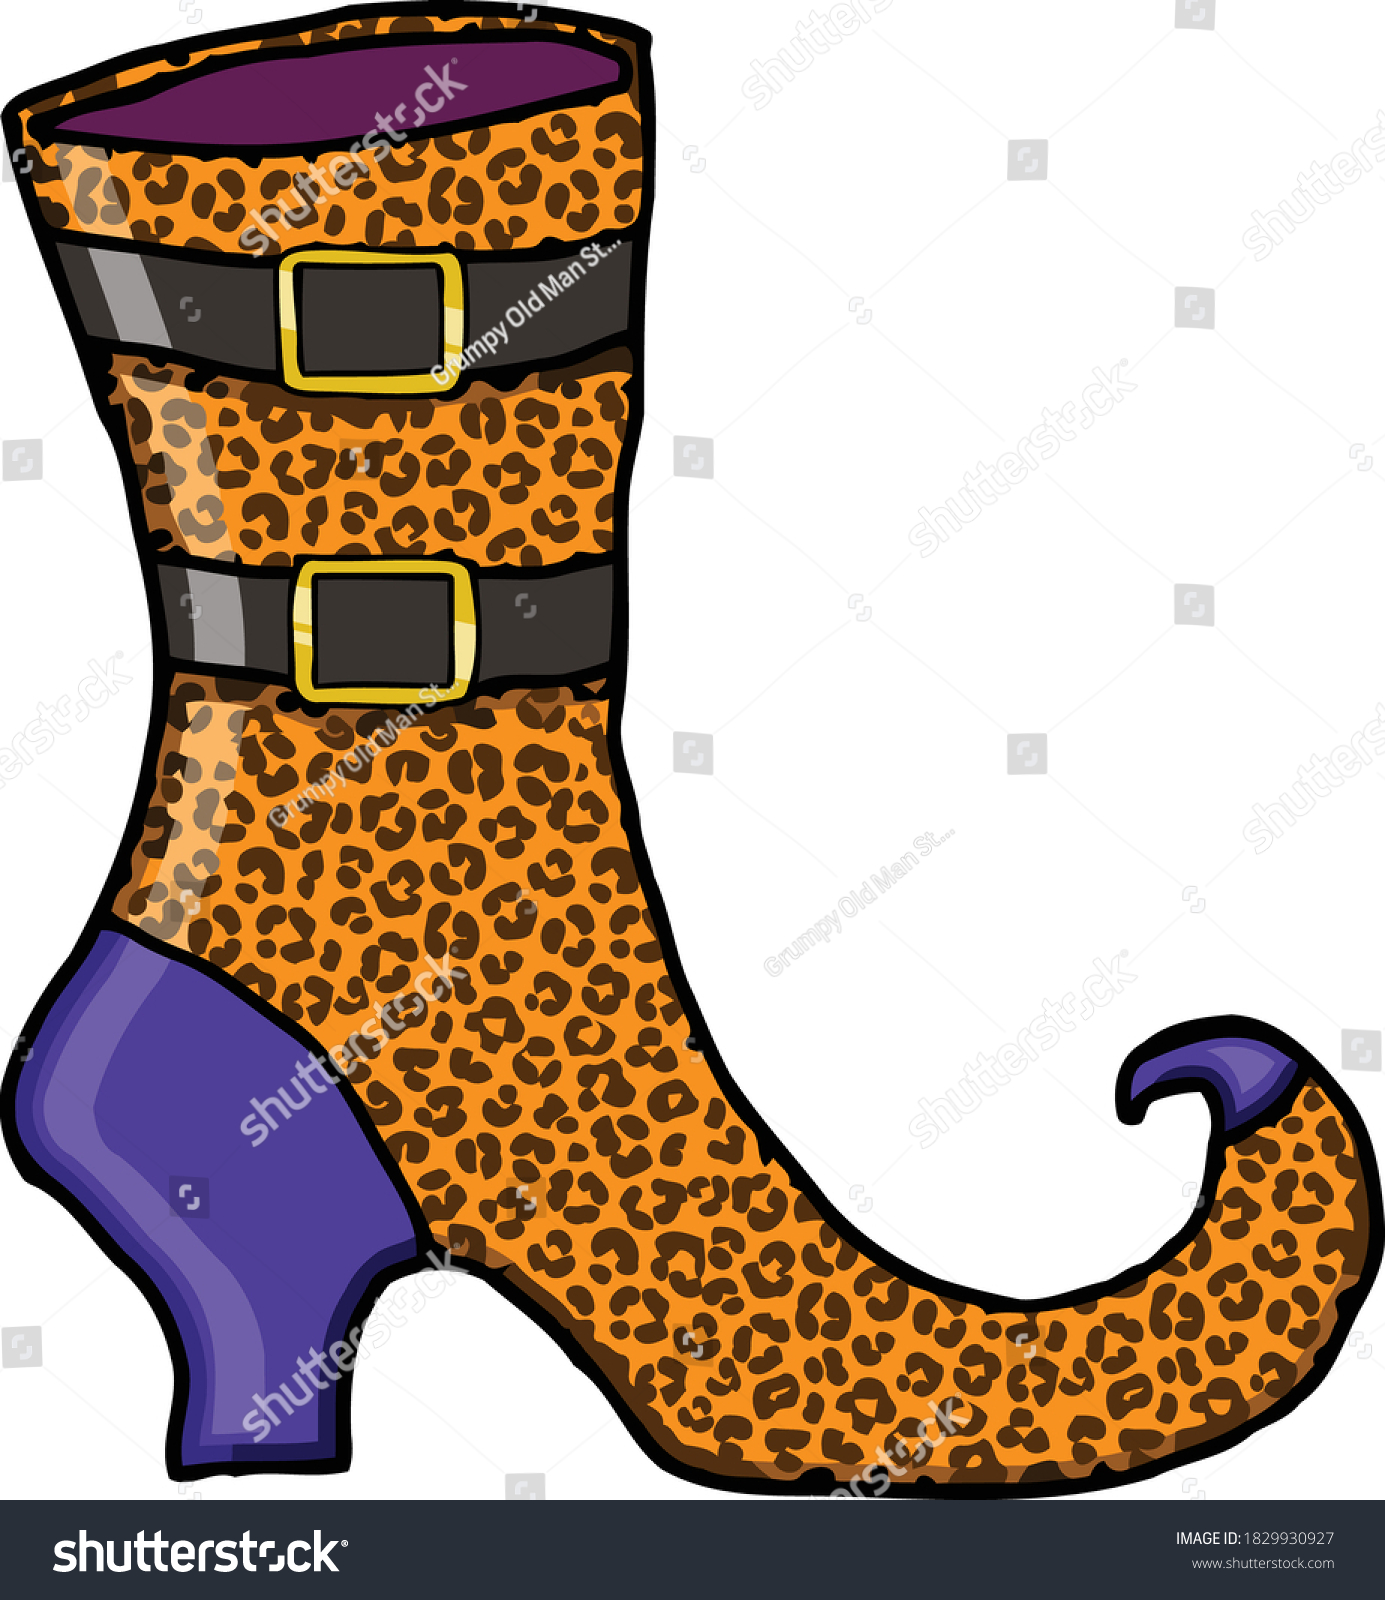 SVG of Trick or treat in style with these different witches shoes.  This clip art pack features a witch's shoe in several different fun patterns including buffalo plaid and leopard prints.  svg